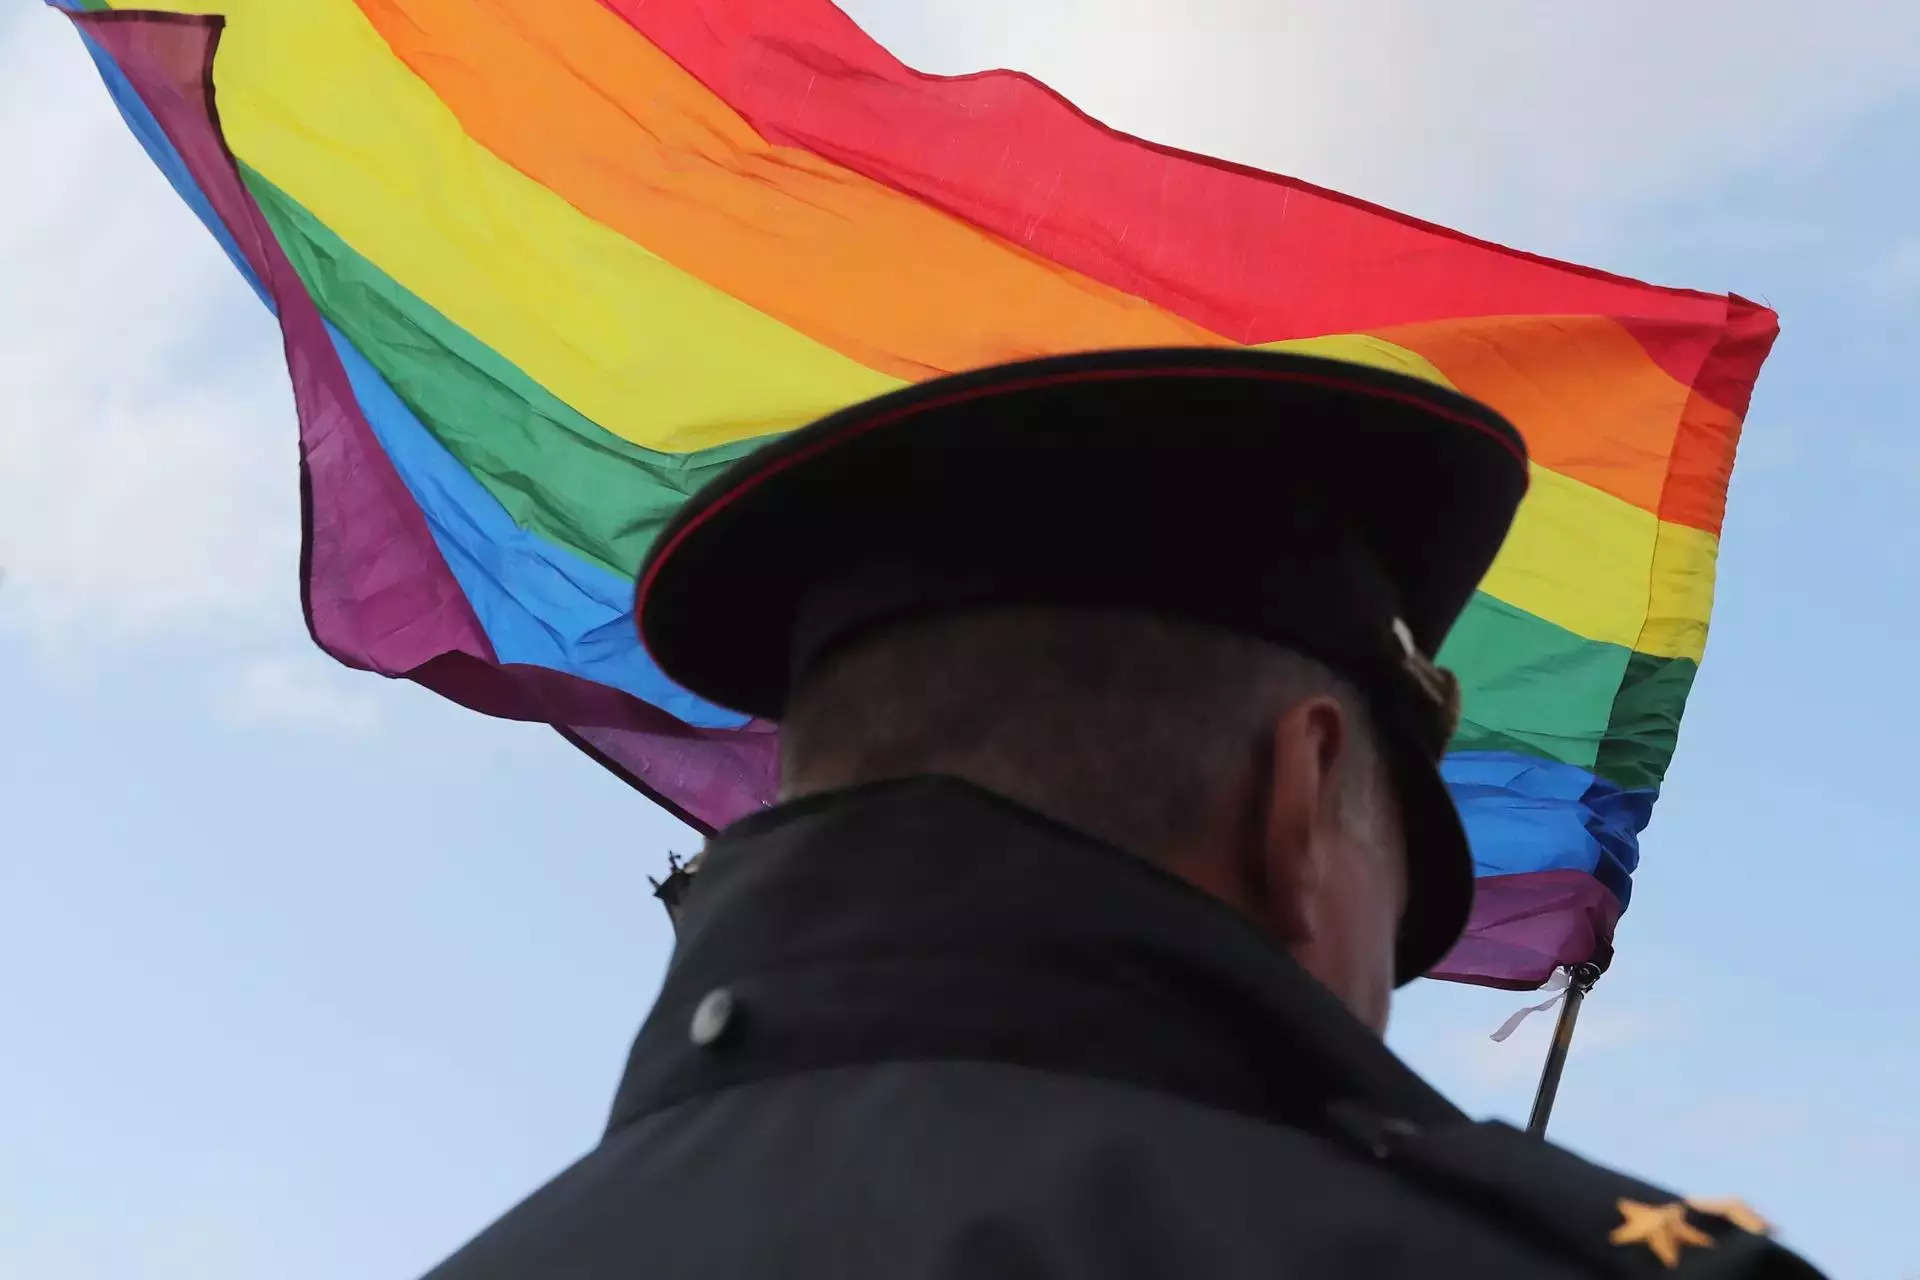 LGBTQ+ club owner arrested in Russia for 'extremism'